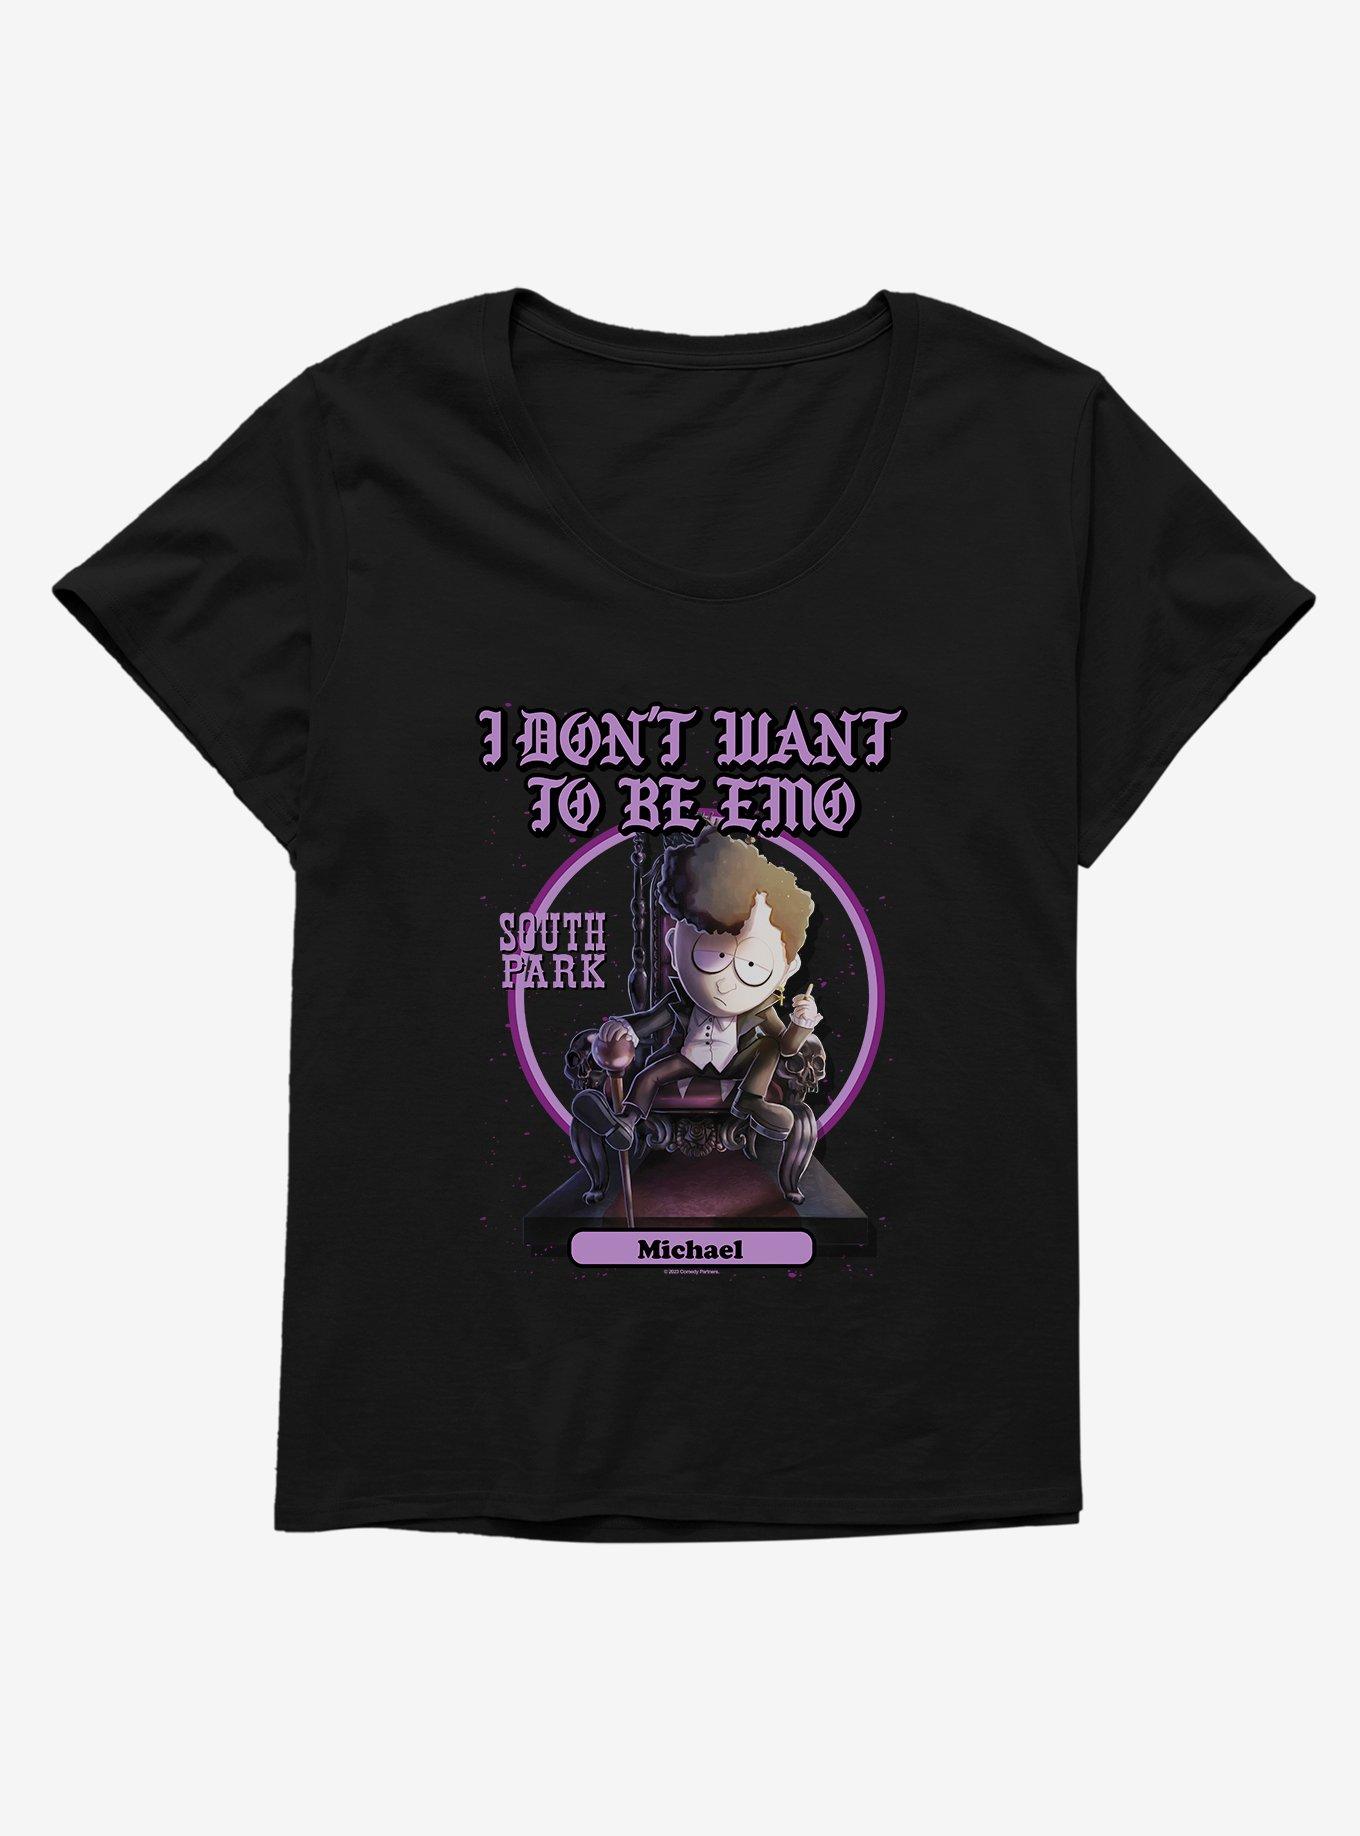 South Park I Don't Want To Be Emo Girls T-Shirt Plus Size, BLACK, hi-res